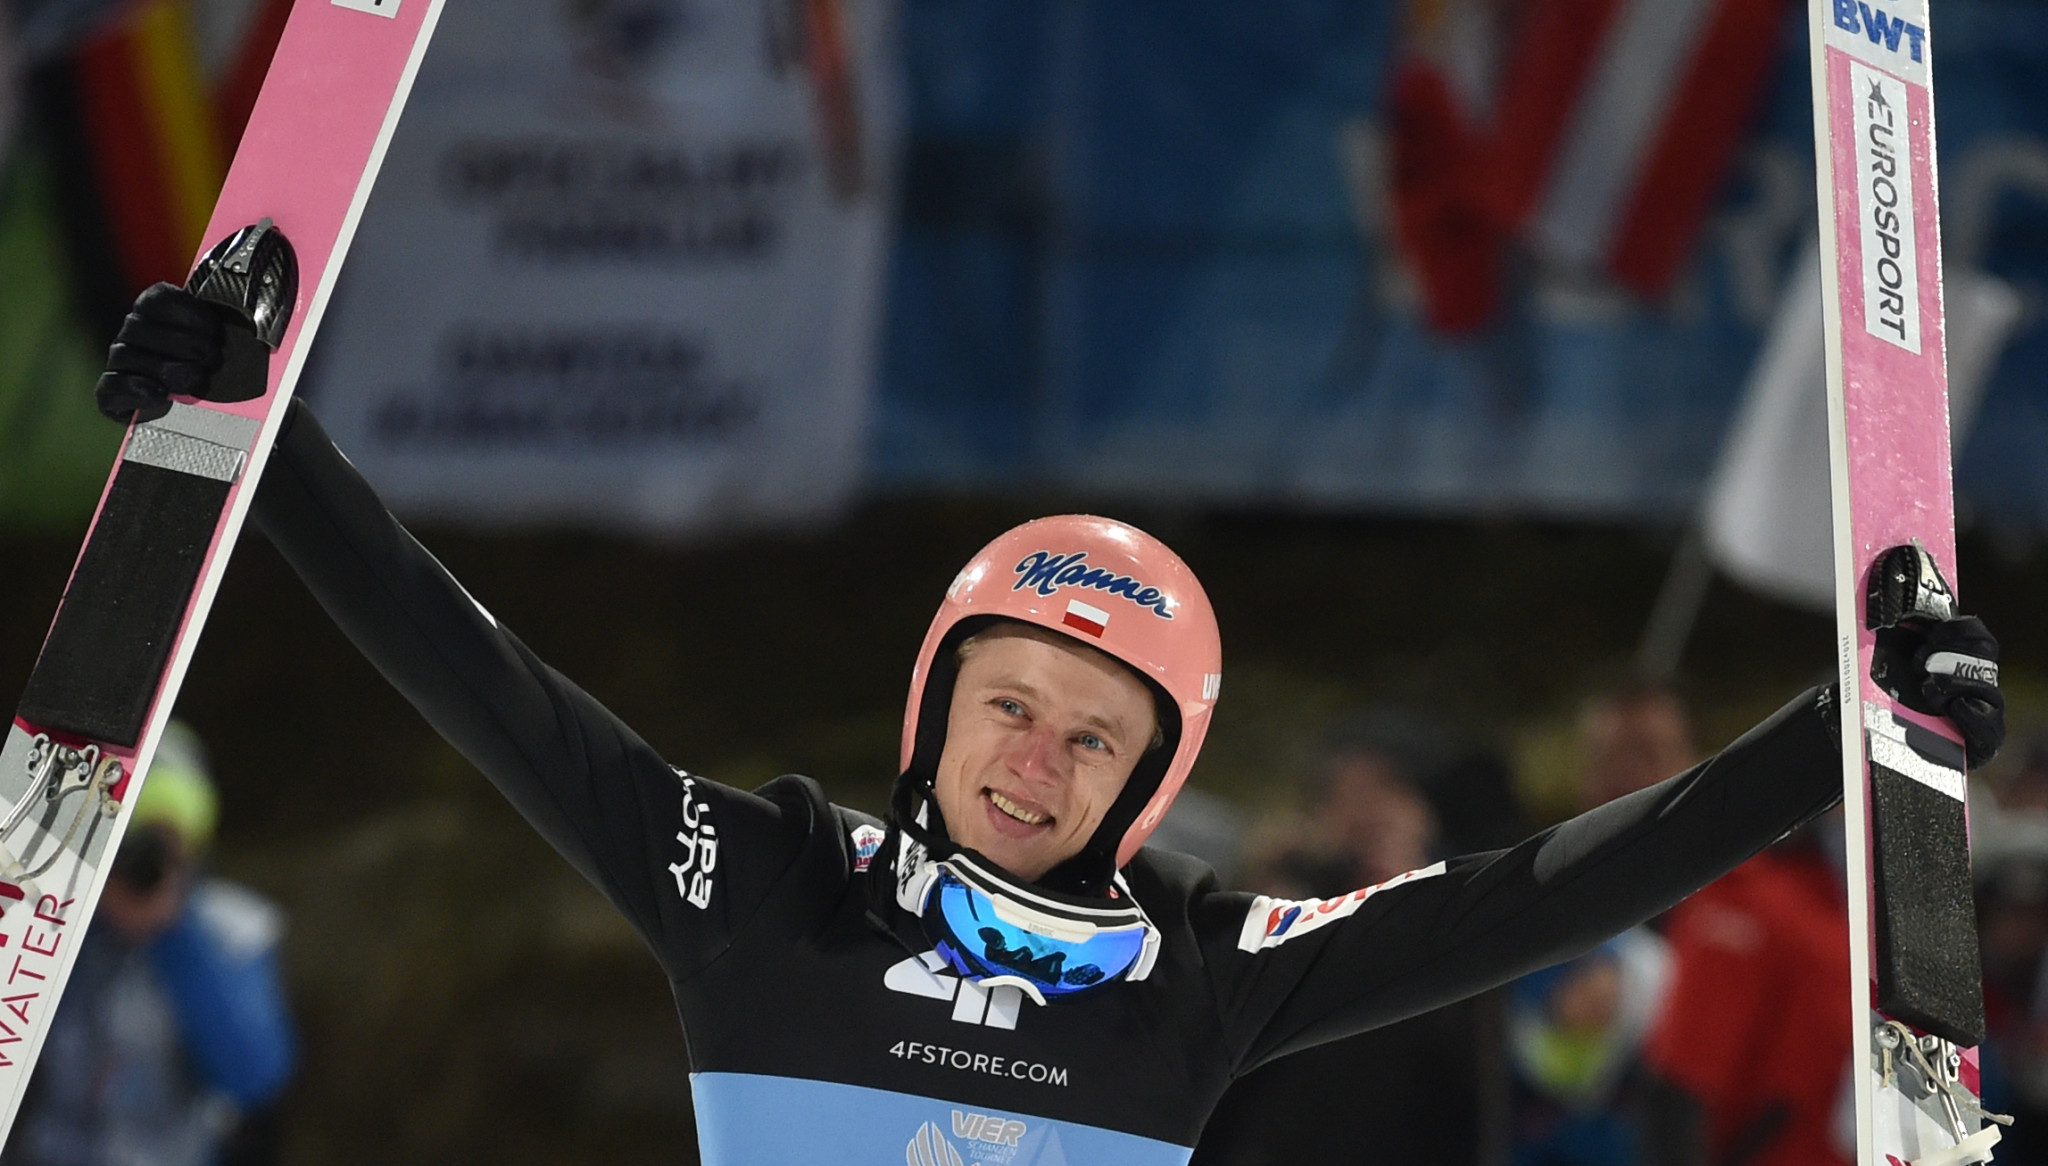 Kubacki secures double victory at FIS Ski Jumping World Cup in Titisee-Neustadt